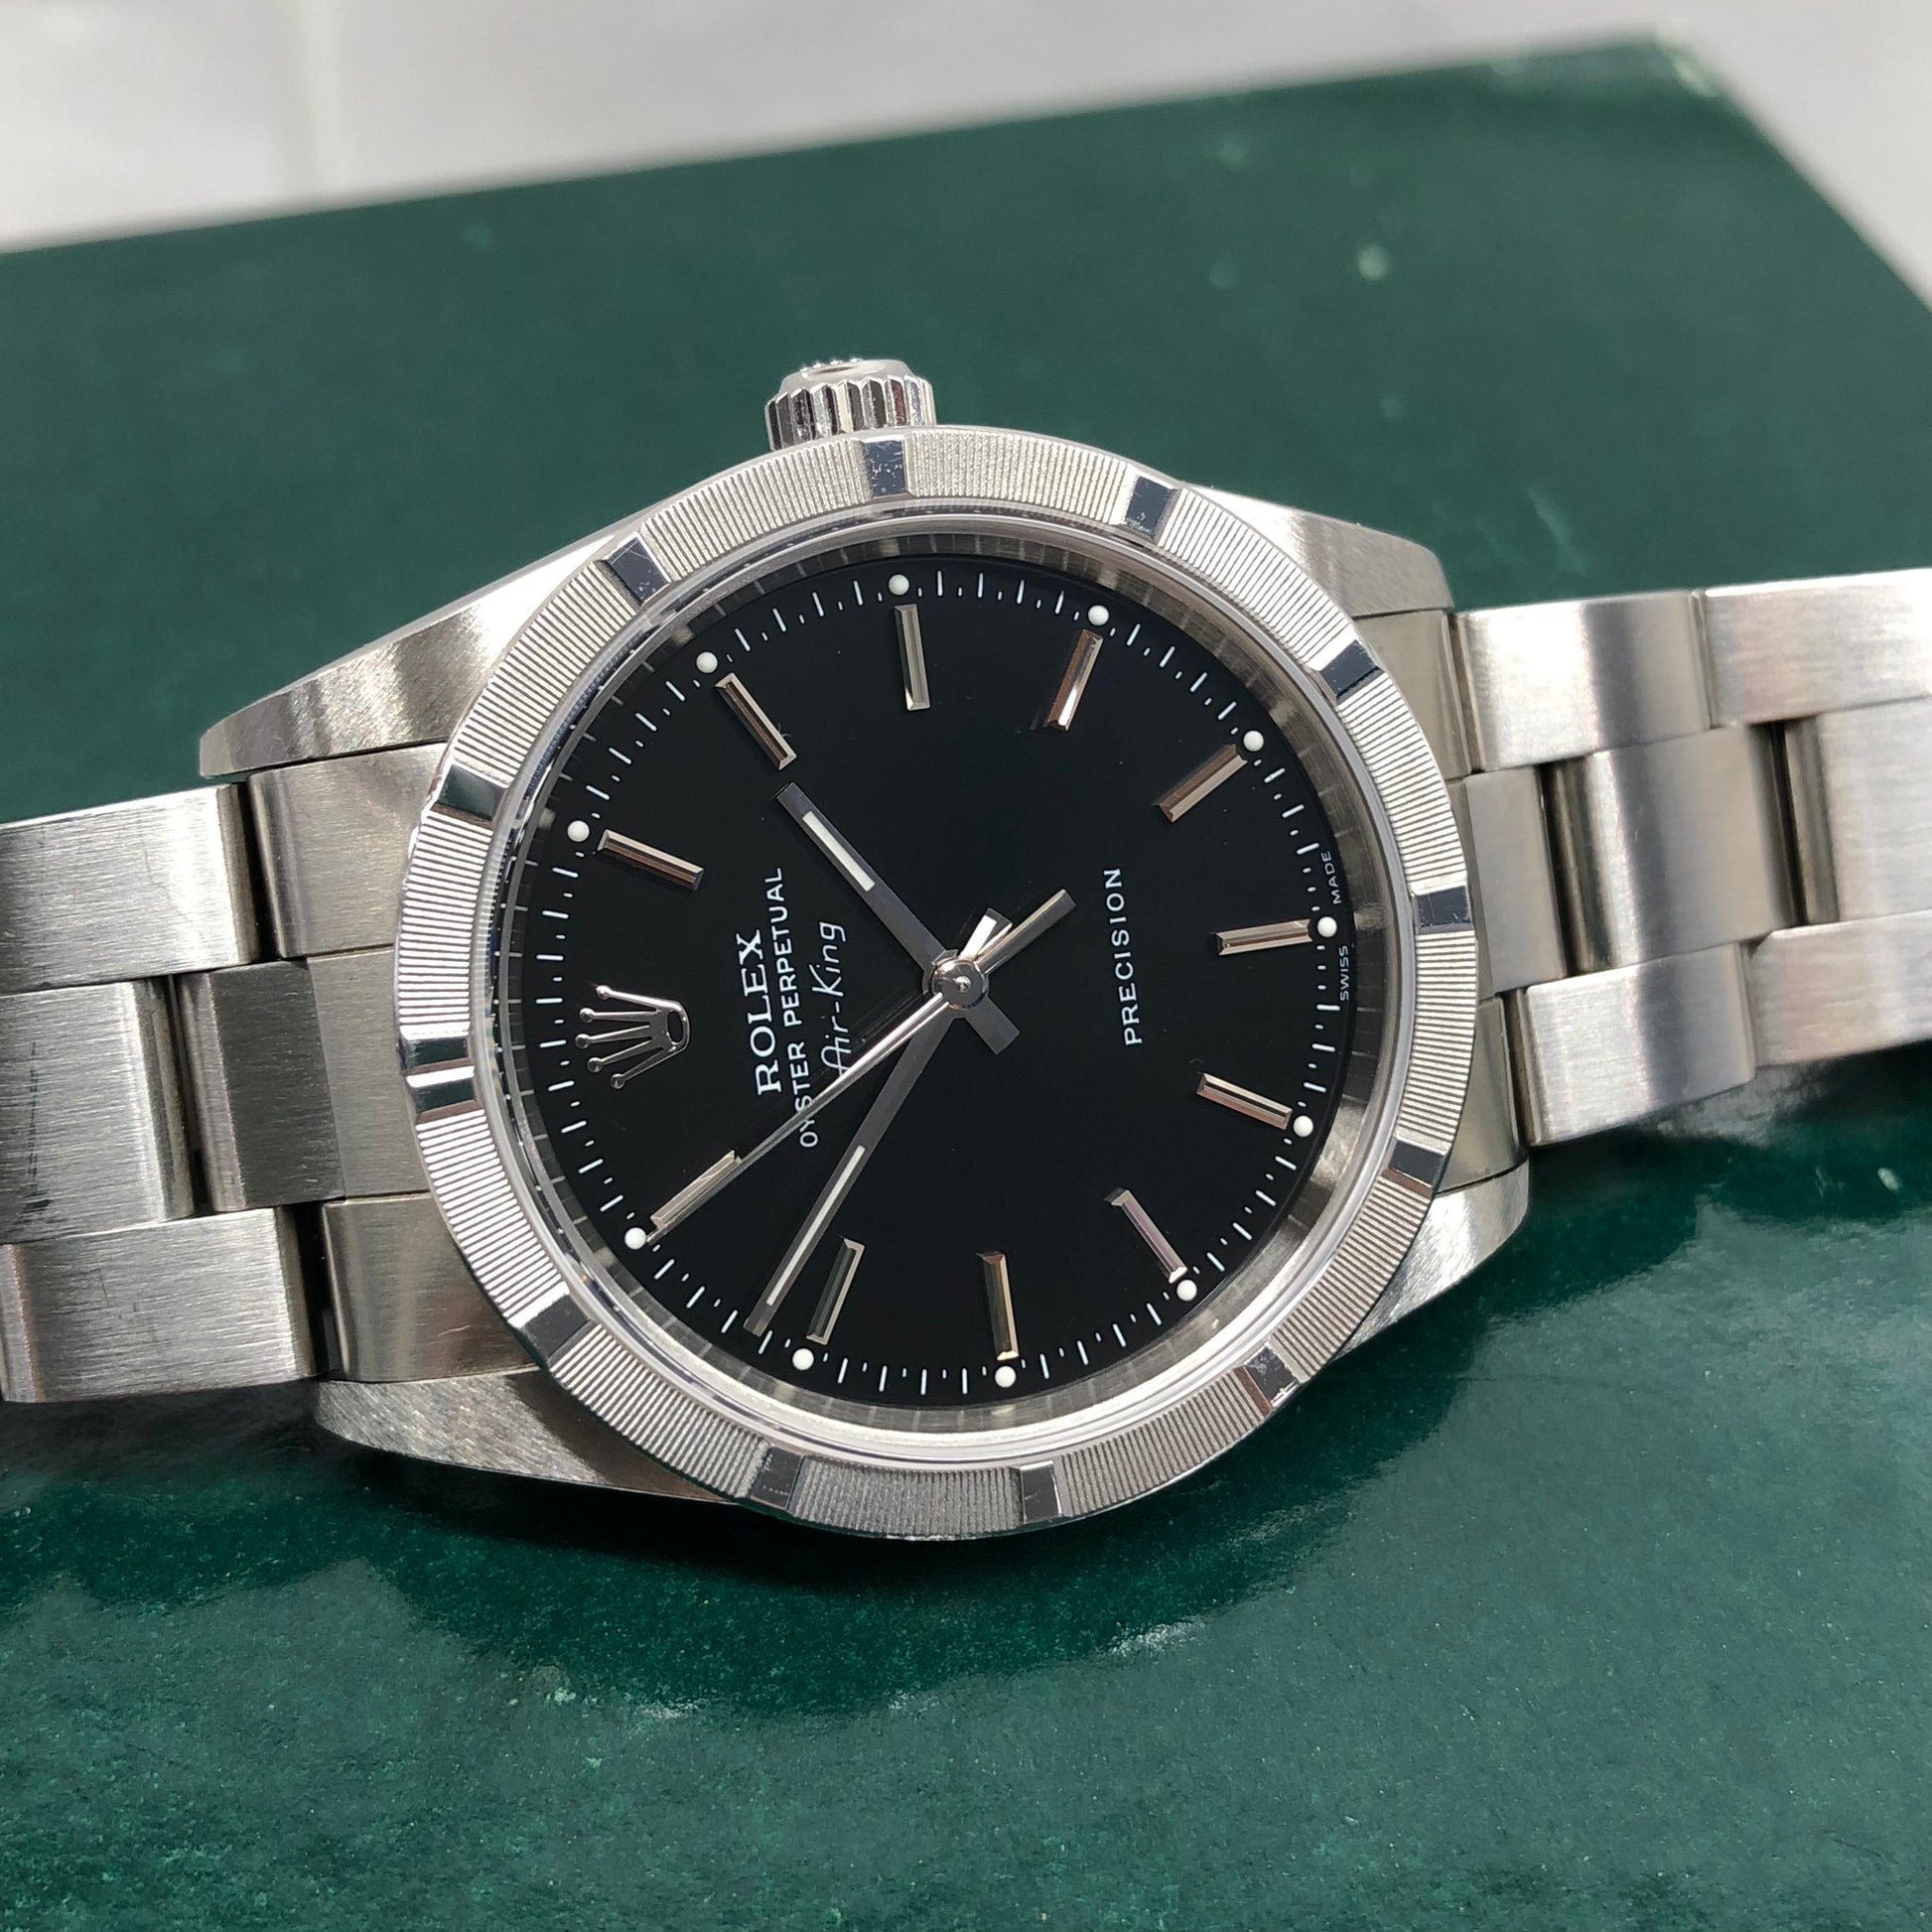 2004 Rolex Air King 14010M Black Dial Oyster Engine Turned Automatic Wristwatch - HASHTAGWATCHCO